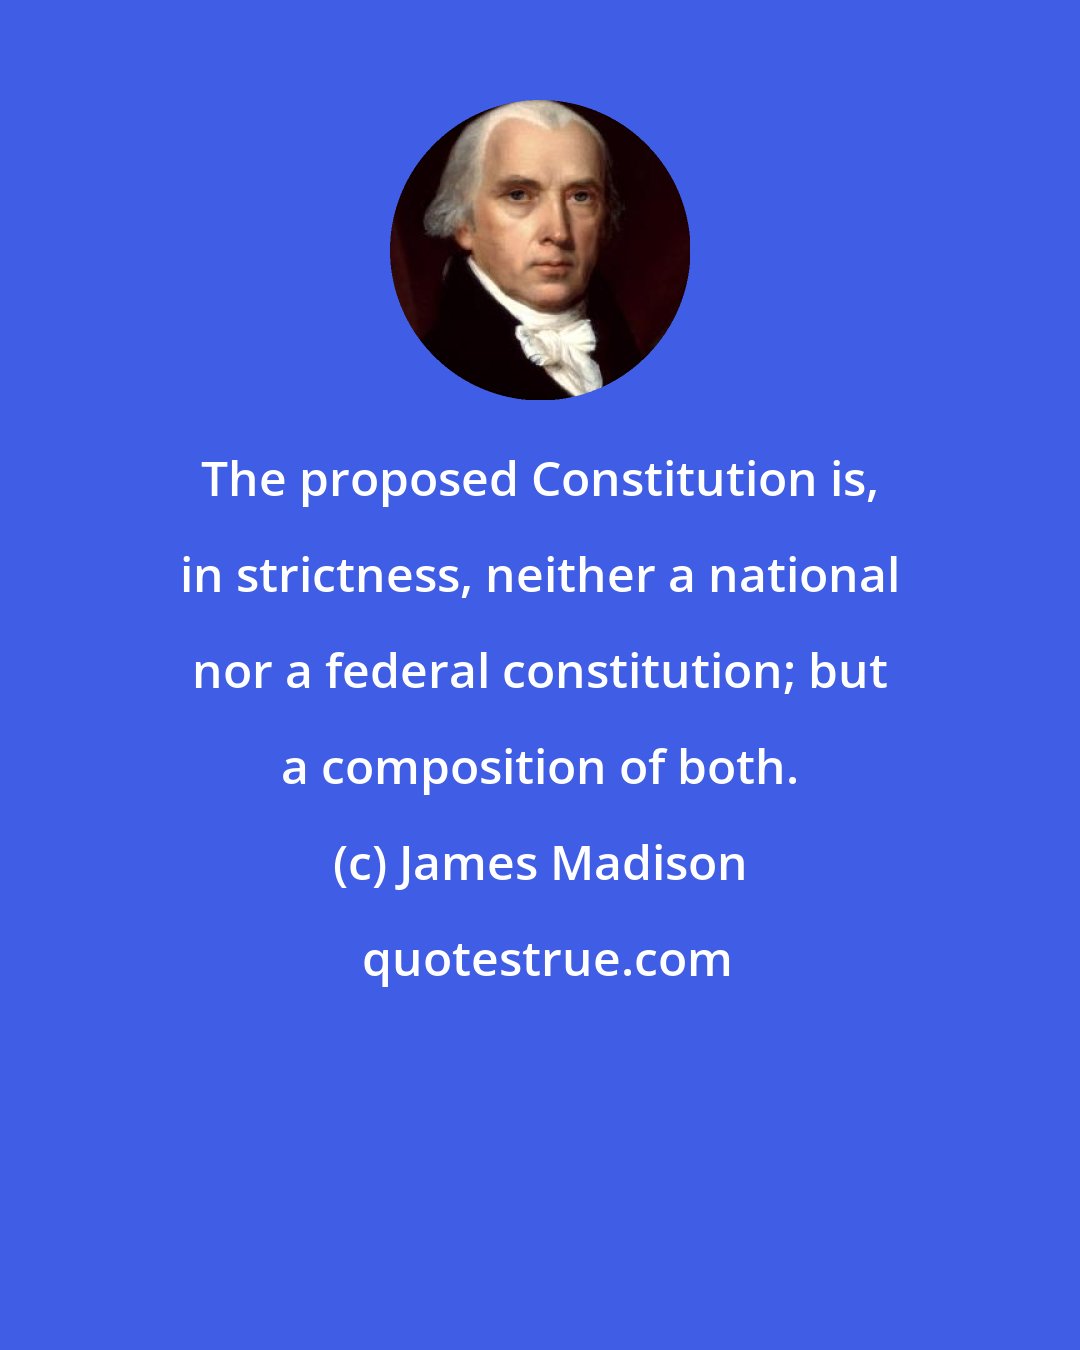 James Madison: The proposed Constitution is, in strictness, neither a national nor a federal constitution; but a composition of both.